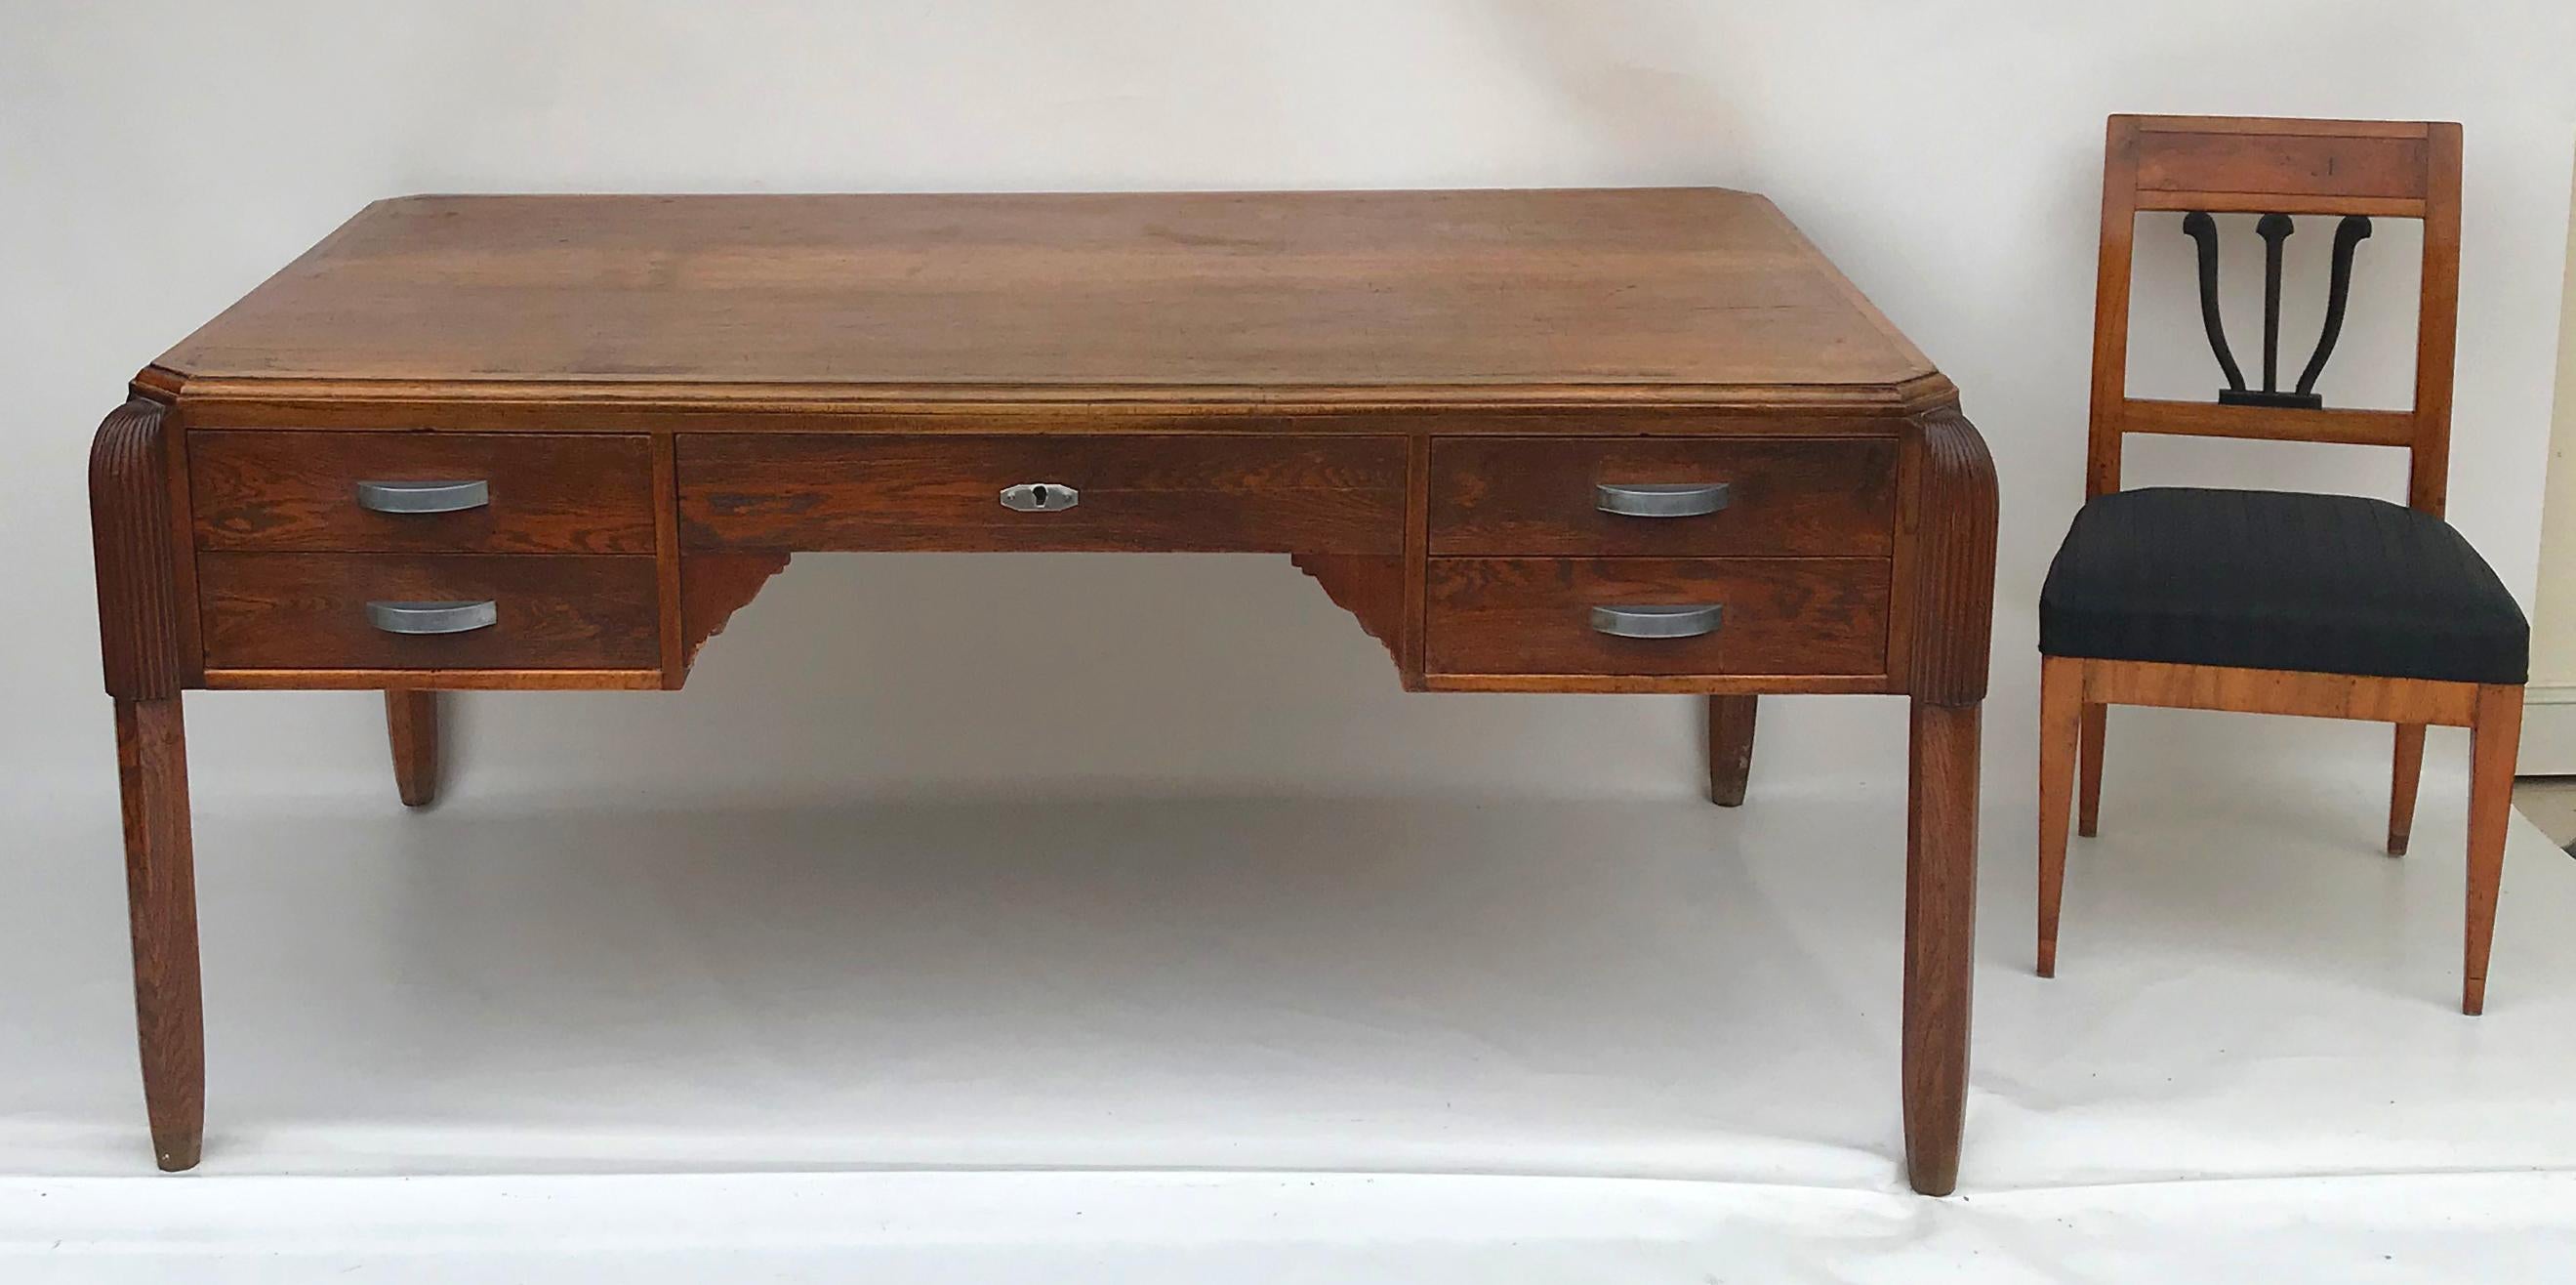 Attributed to Paul Follot, large Art Déco desk, 1920s. Made of walnut and oak. 

Round, caneled legs attached to the body, front with five drawers and original handles and locks, recessed top. The desk captivates with its sleek design. It will be